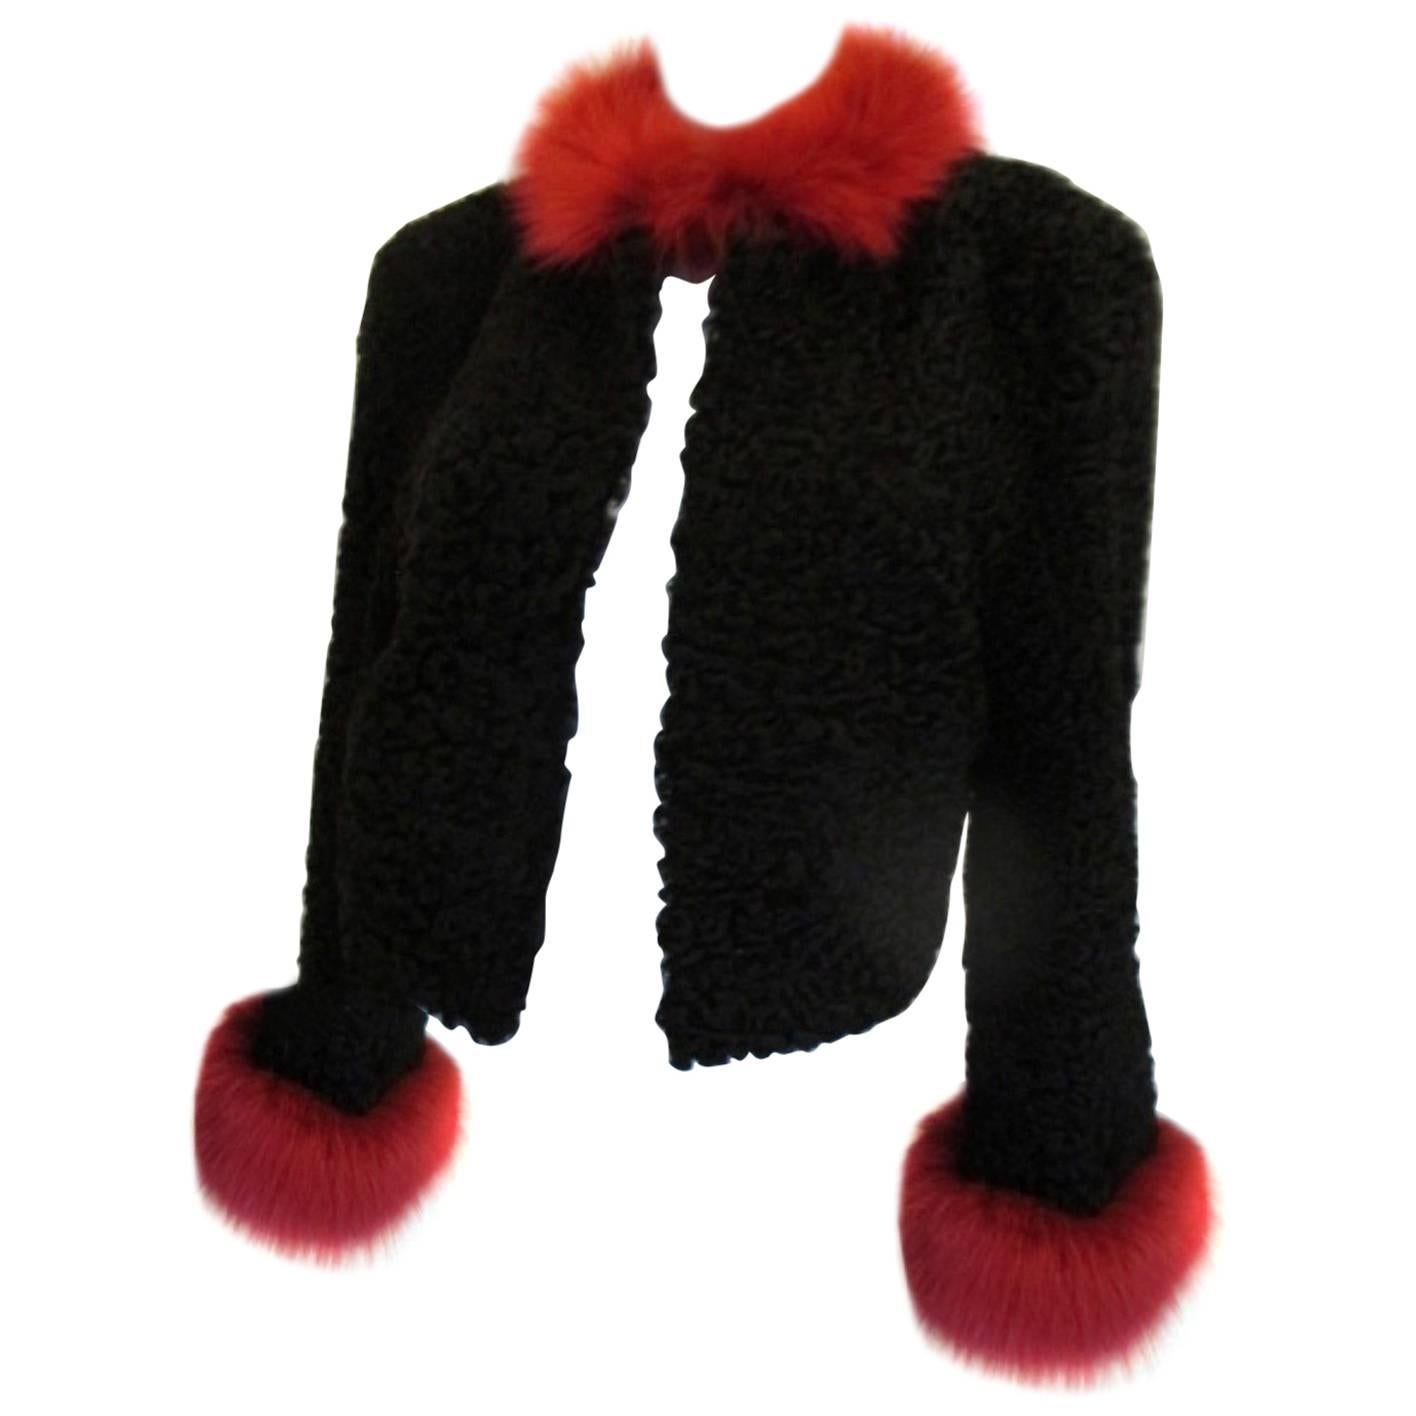 Black Persian Lamb Jacket trimmed with red Fox Fur